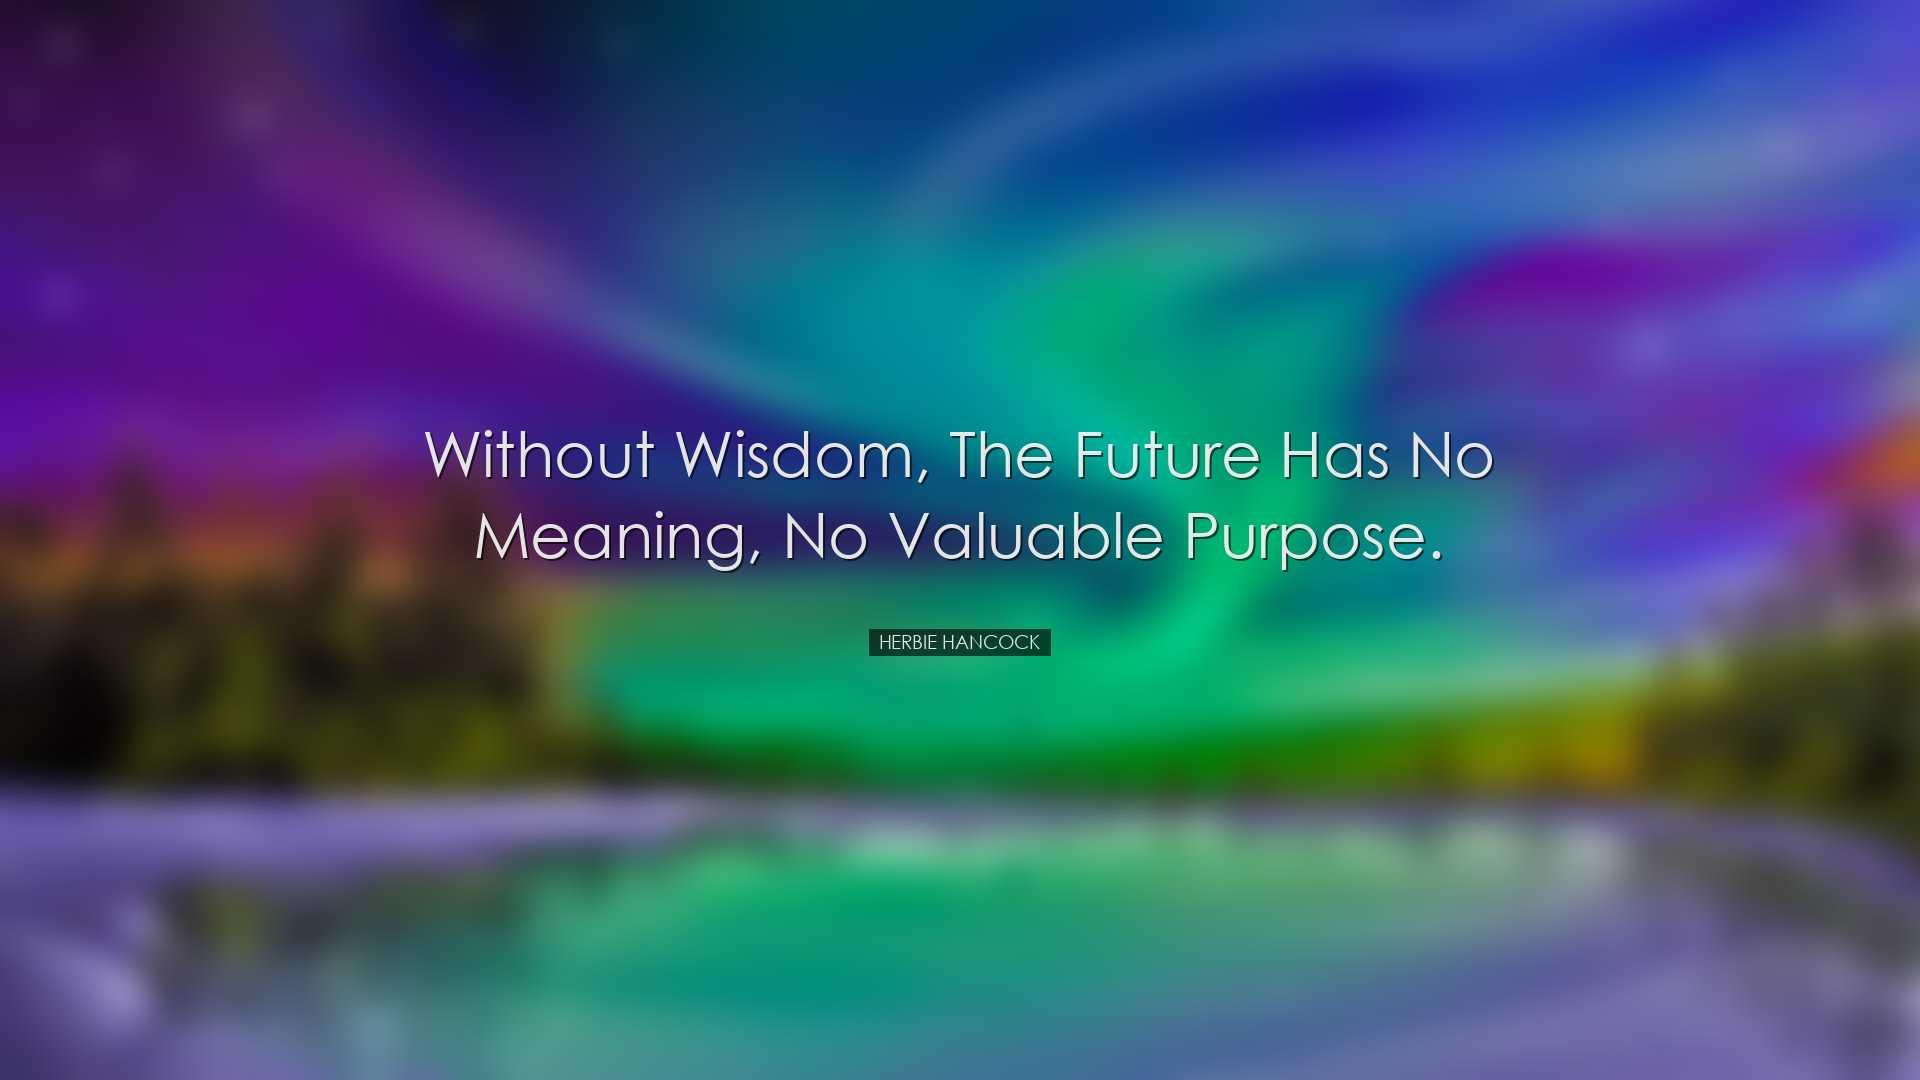 Without wisdom, the future has no meaning, no valuable purpose. -